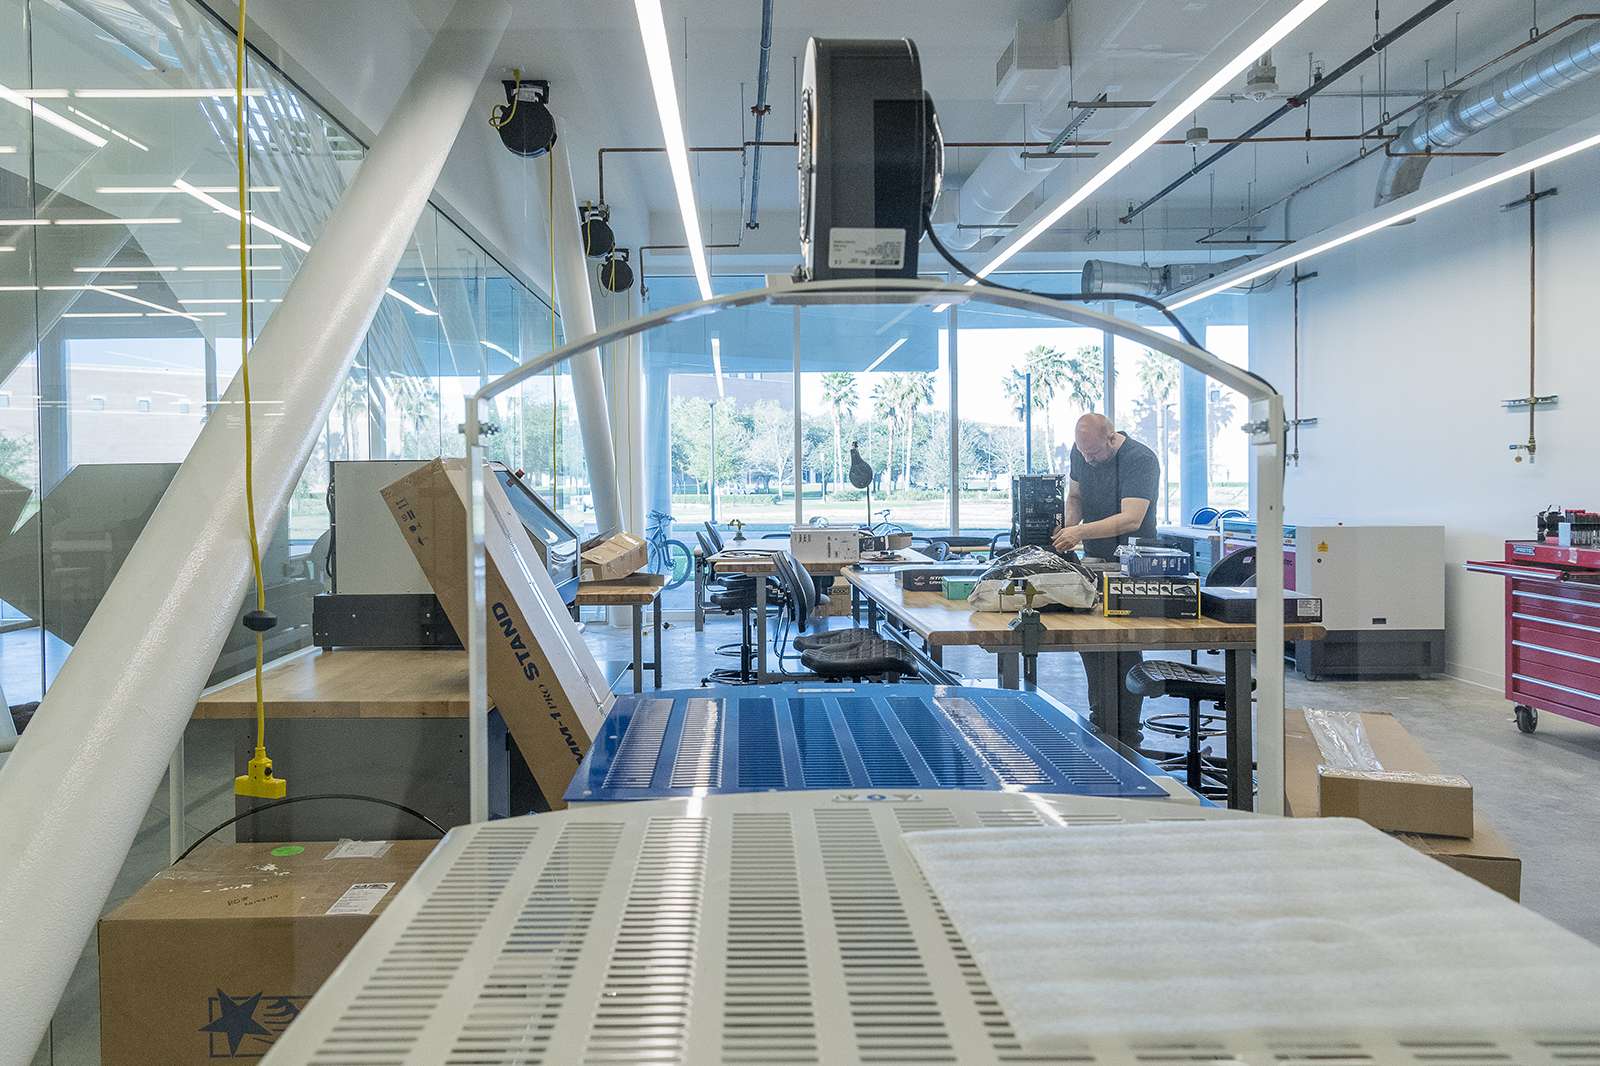 The rapid prototyping shop in the Moody Makerspace area. Photo: Nash Baker